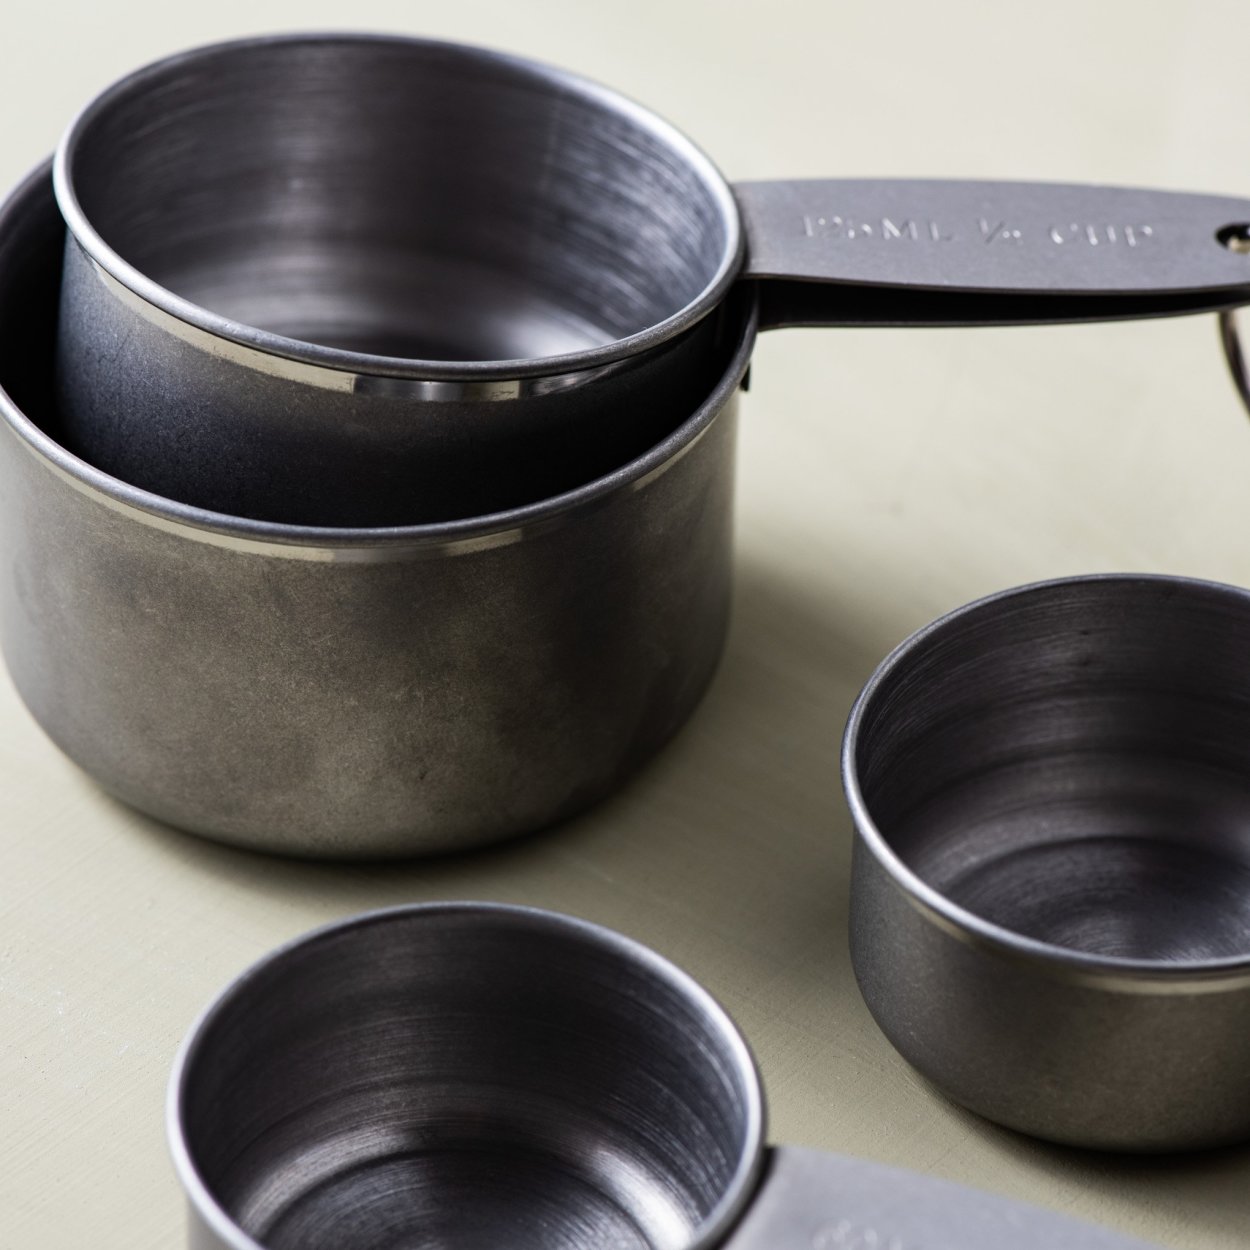 Measuring cup stainless steel